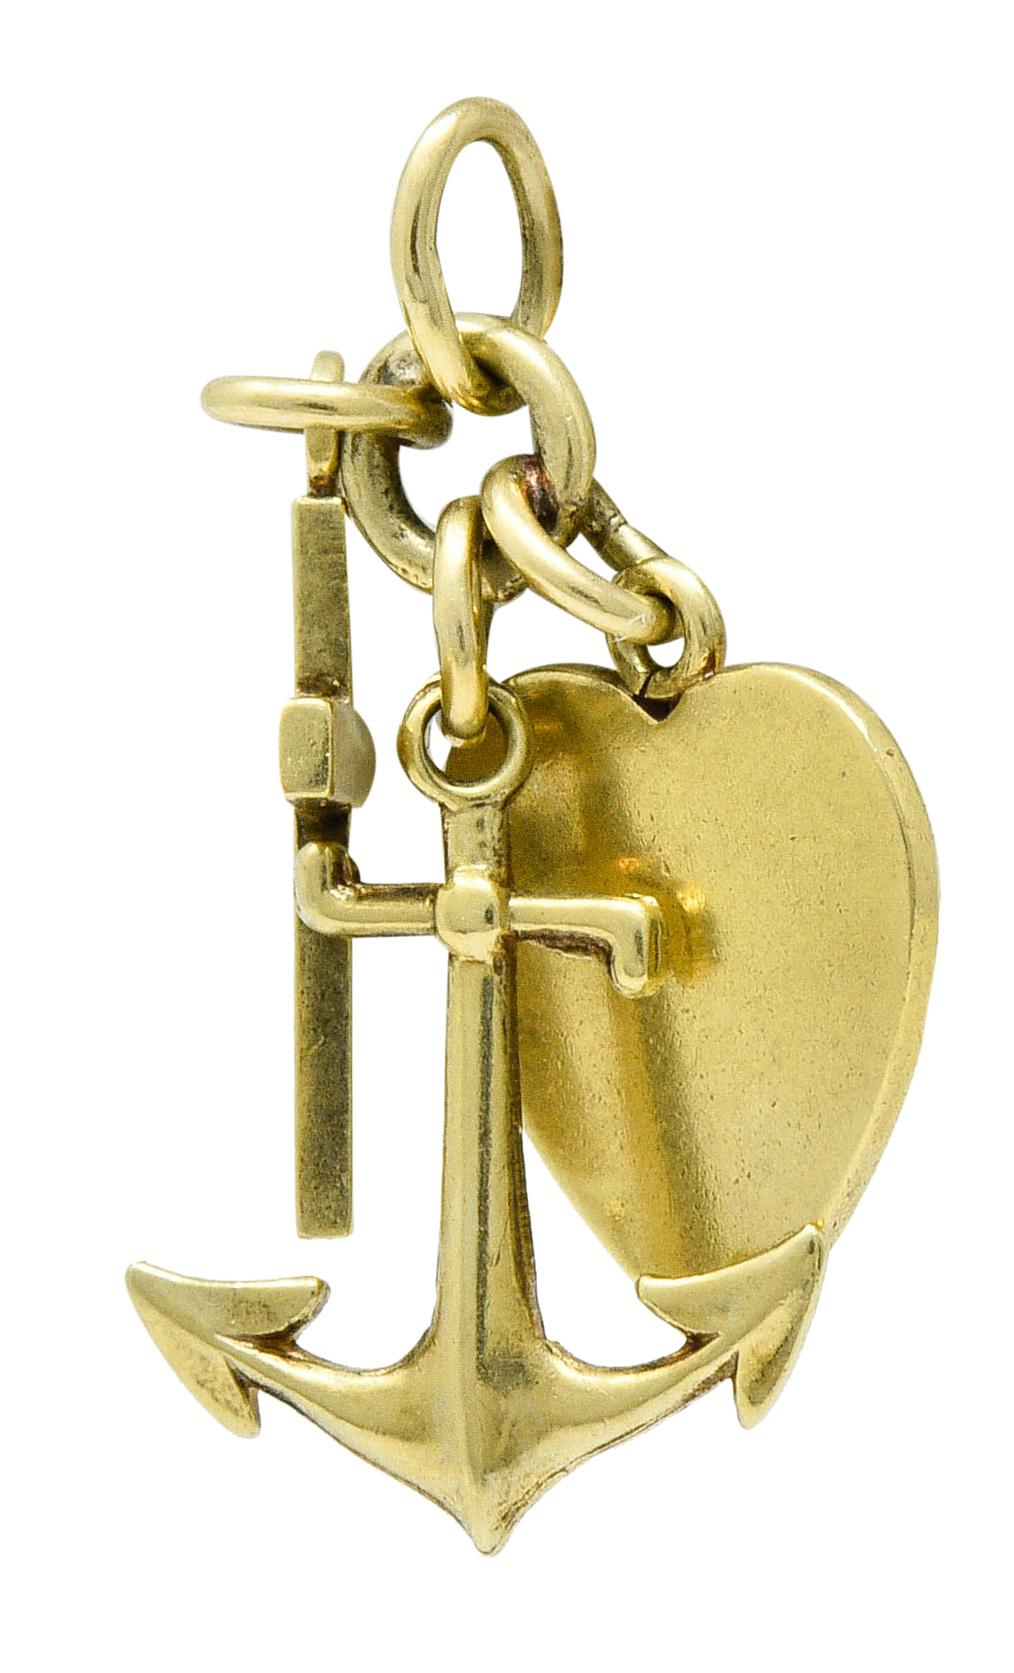 Designed as a cluster of three charms

Suspending a cross, an anchor, and a heart

Symbolic of faith, hope, and love - respectively

Stamped 14K for 14 karat gold

Maker's mark for Richardson Manufacturing Co.

Circa: 1940s

Measures approx.: 1/2 x